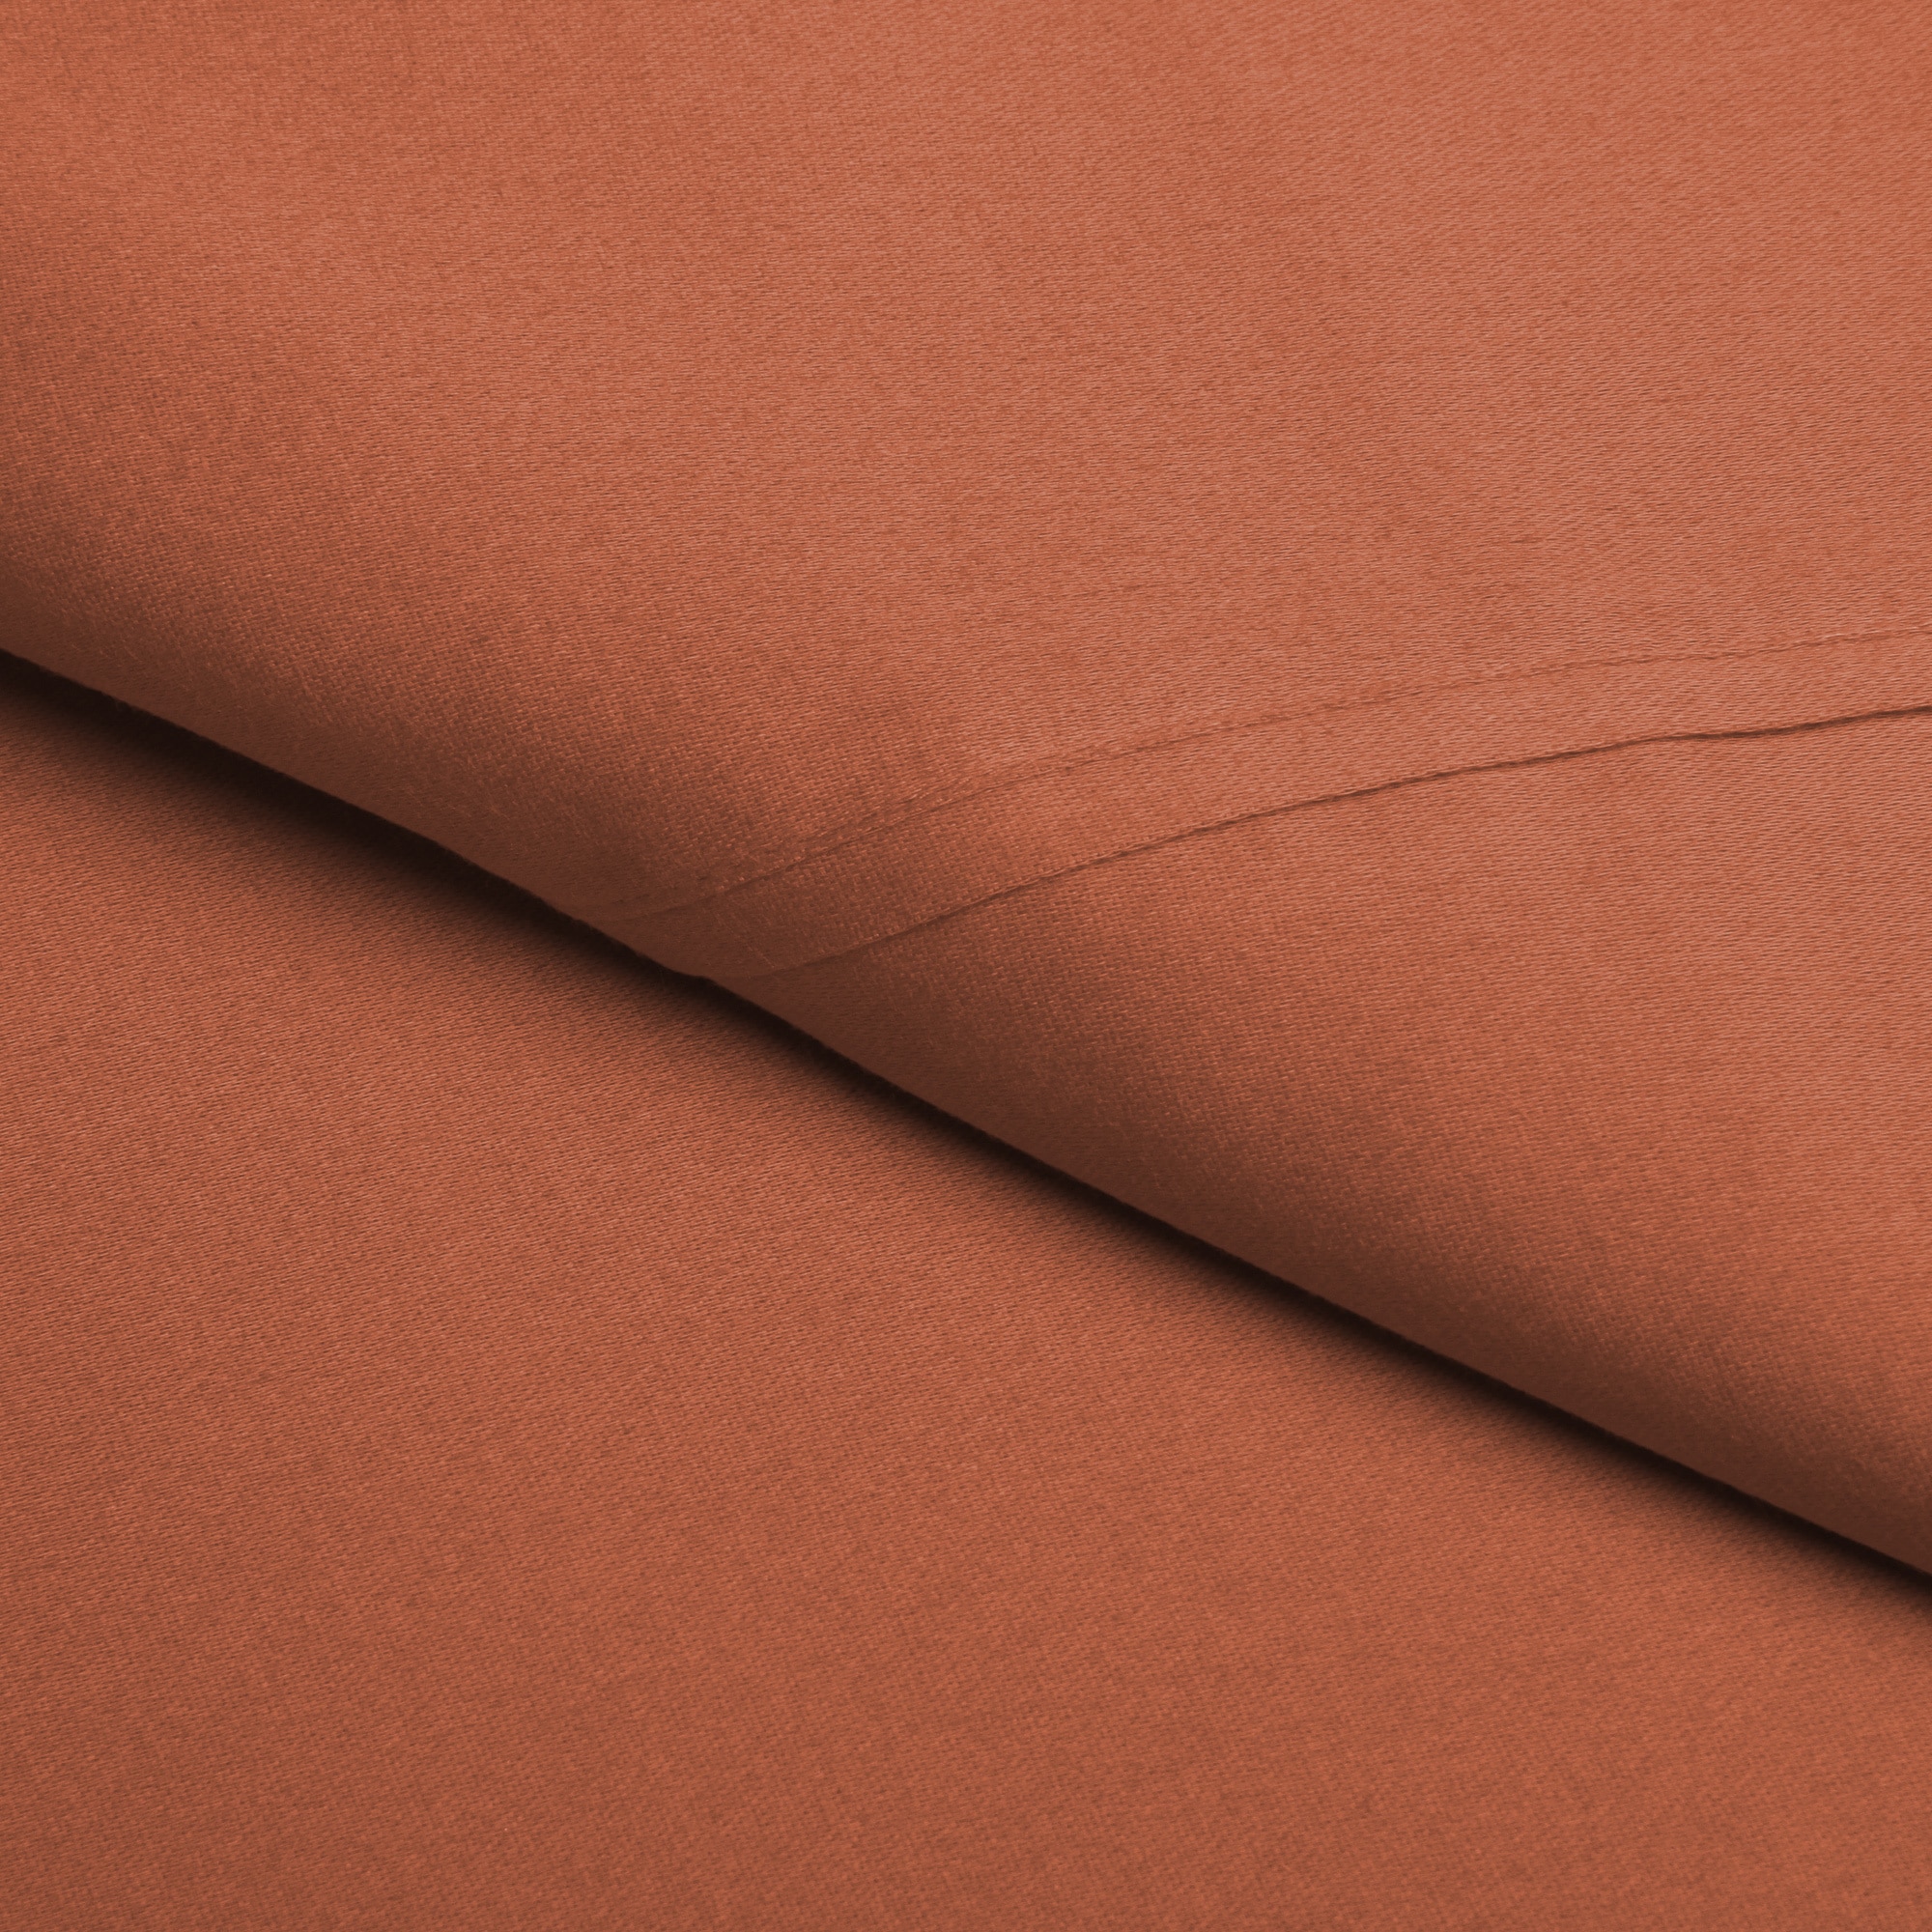 Elite Home Products, Inc Brights Solid Wrinkle Resistant All Cotton Sheet Set Orange Size Twin